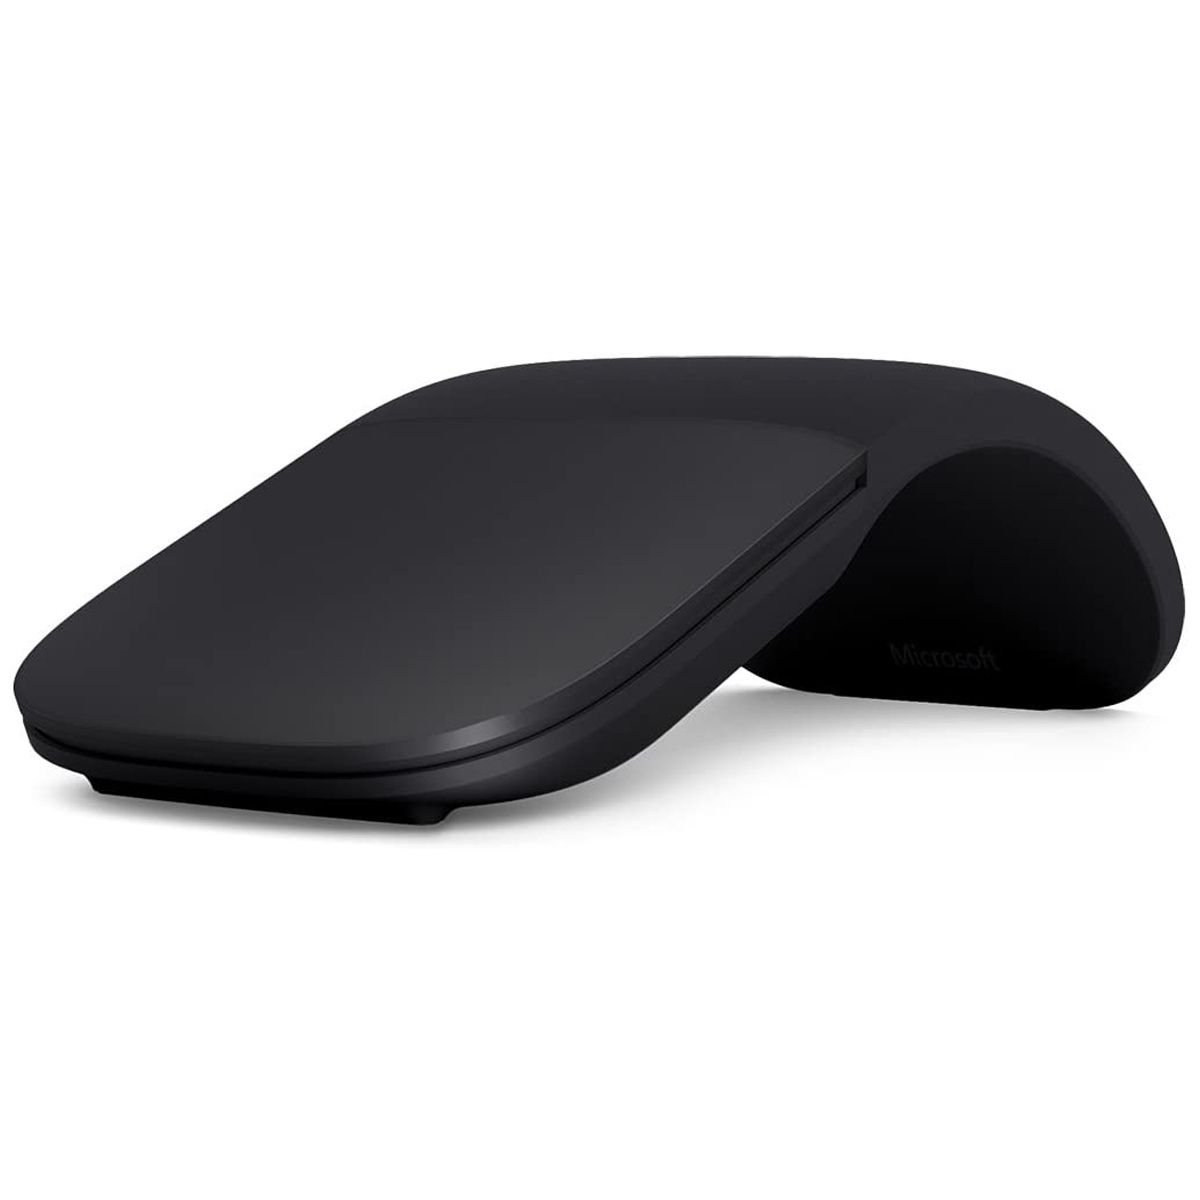 When it comes to portability, not many options come close to Microsoft's Arc Mouse. This bendable mouse can be snapped flat so it can easily slip it into a bag or even a pocket, you can then curve it while you're using it for extra comfort. The scroll wheel is also replaced by a touch-sensitive area.